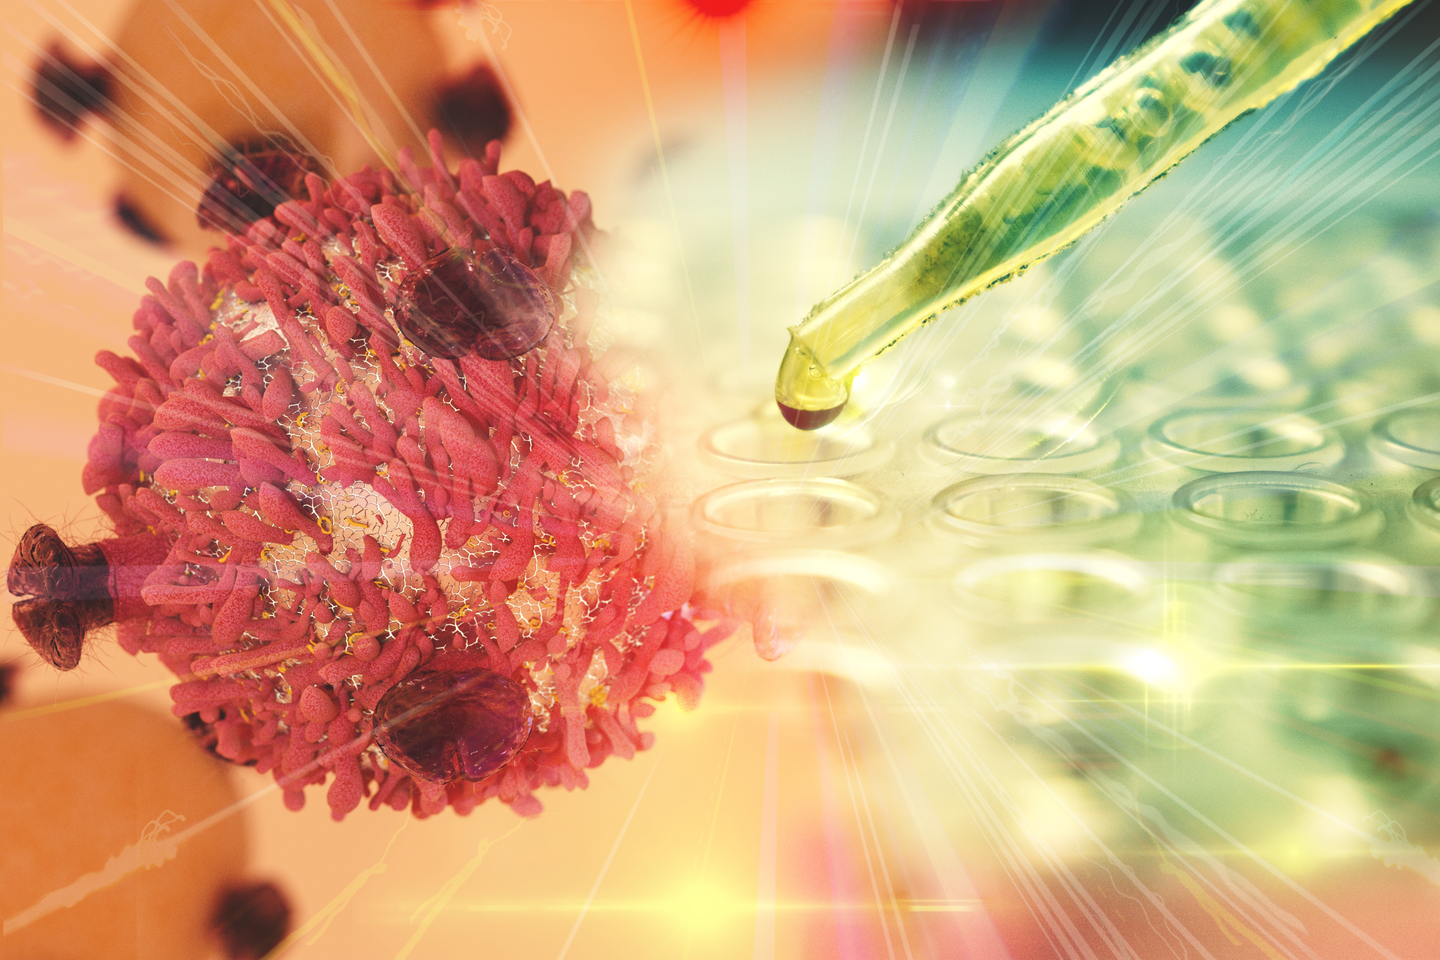 Clinical Results Support Greater Use of Oncology Biosimilars